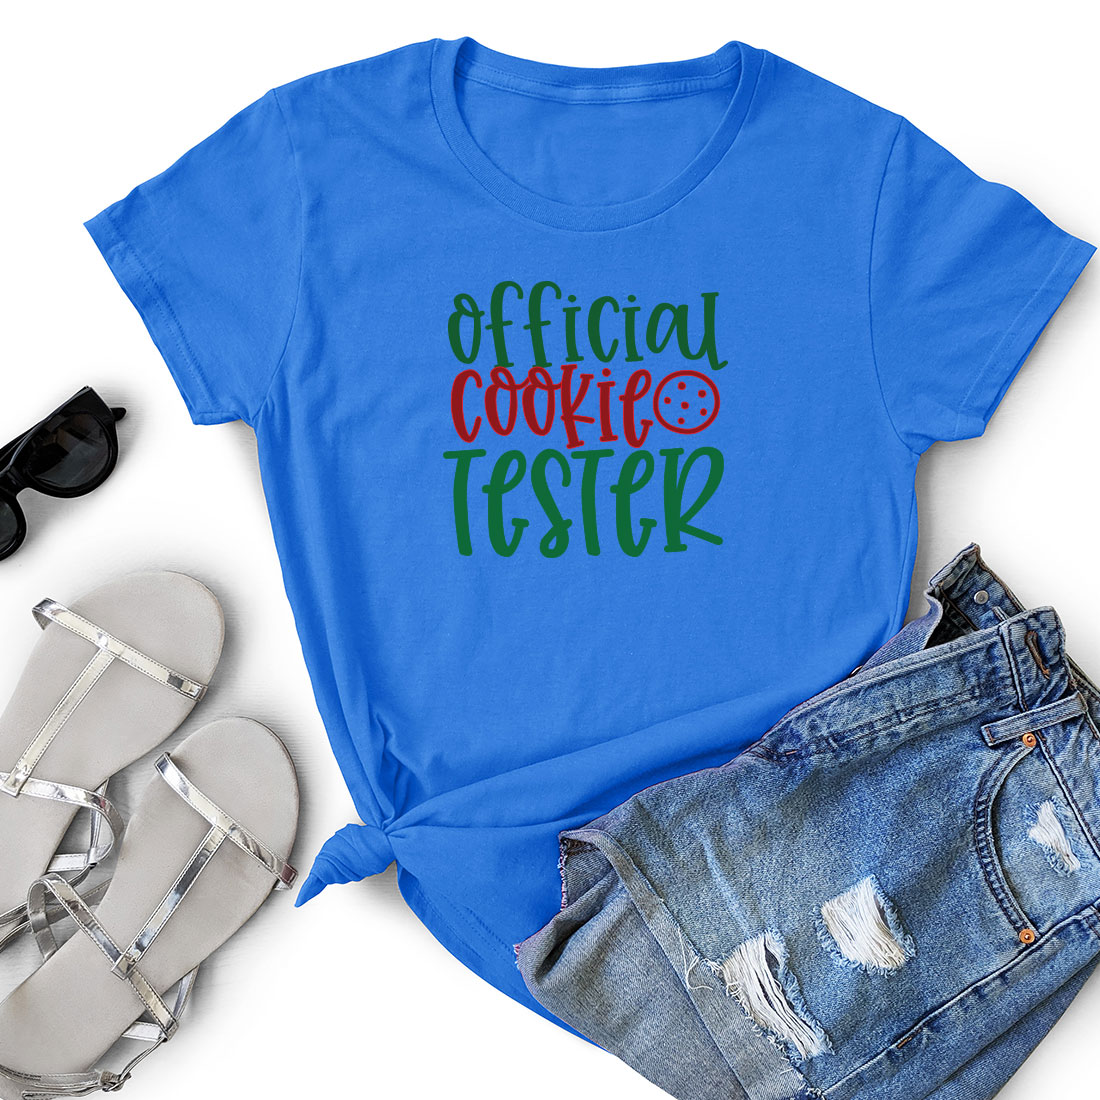 T - shirt that says official cookie tester next to a pair of shorts.